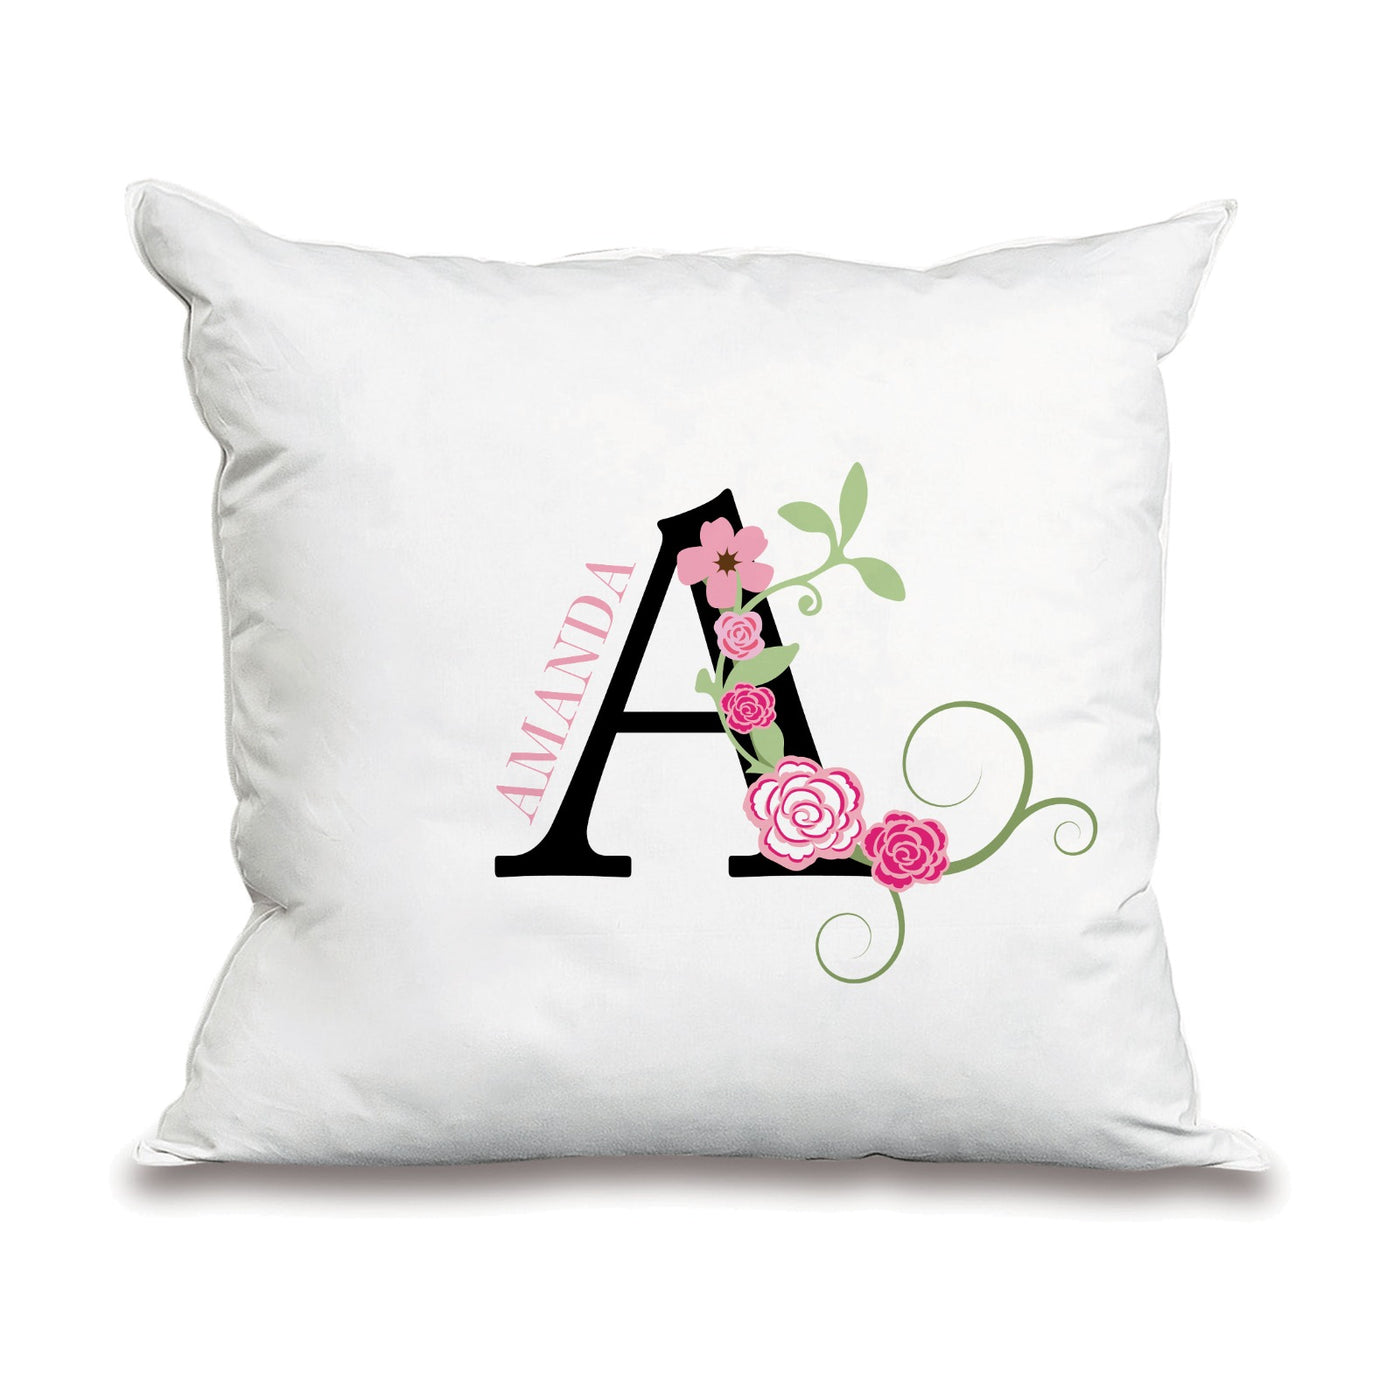 NAME & INITIAL FLORAL FLOWER CUSHION